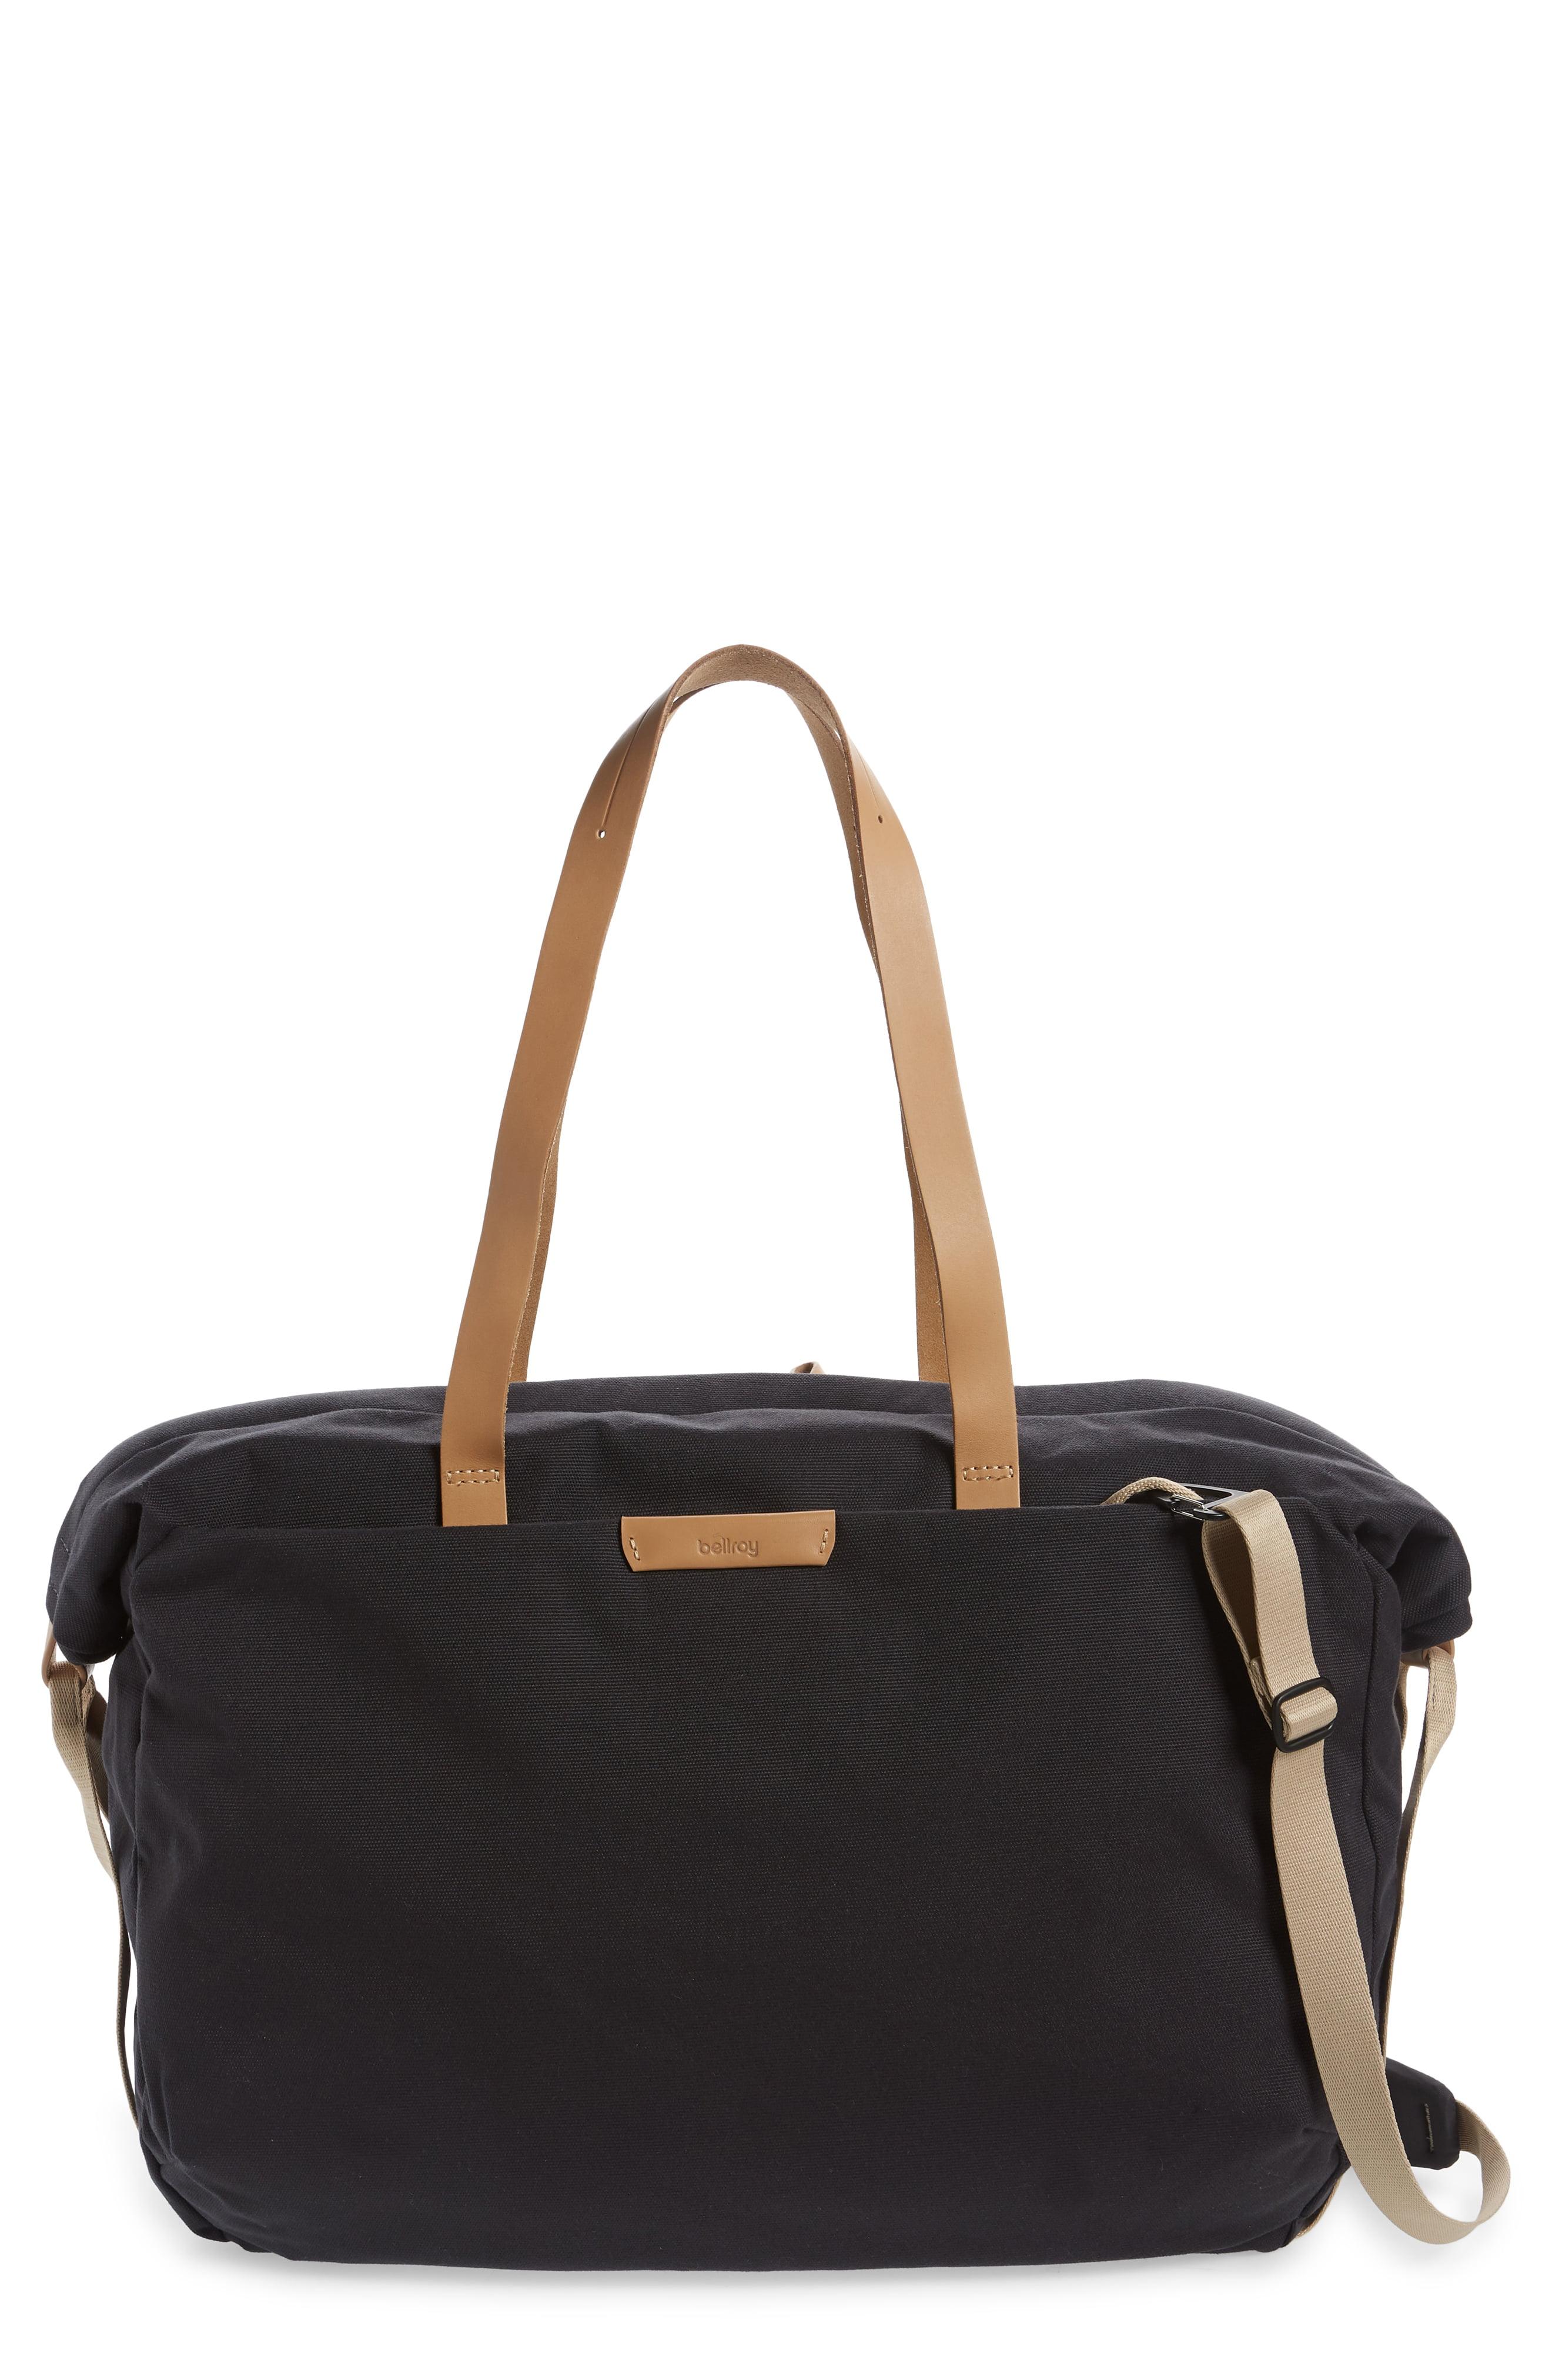 Bellroy Duffle Bag in Charcoal (Black) for Men - Lyst